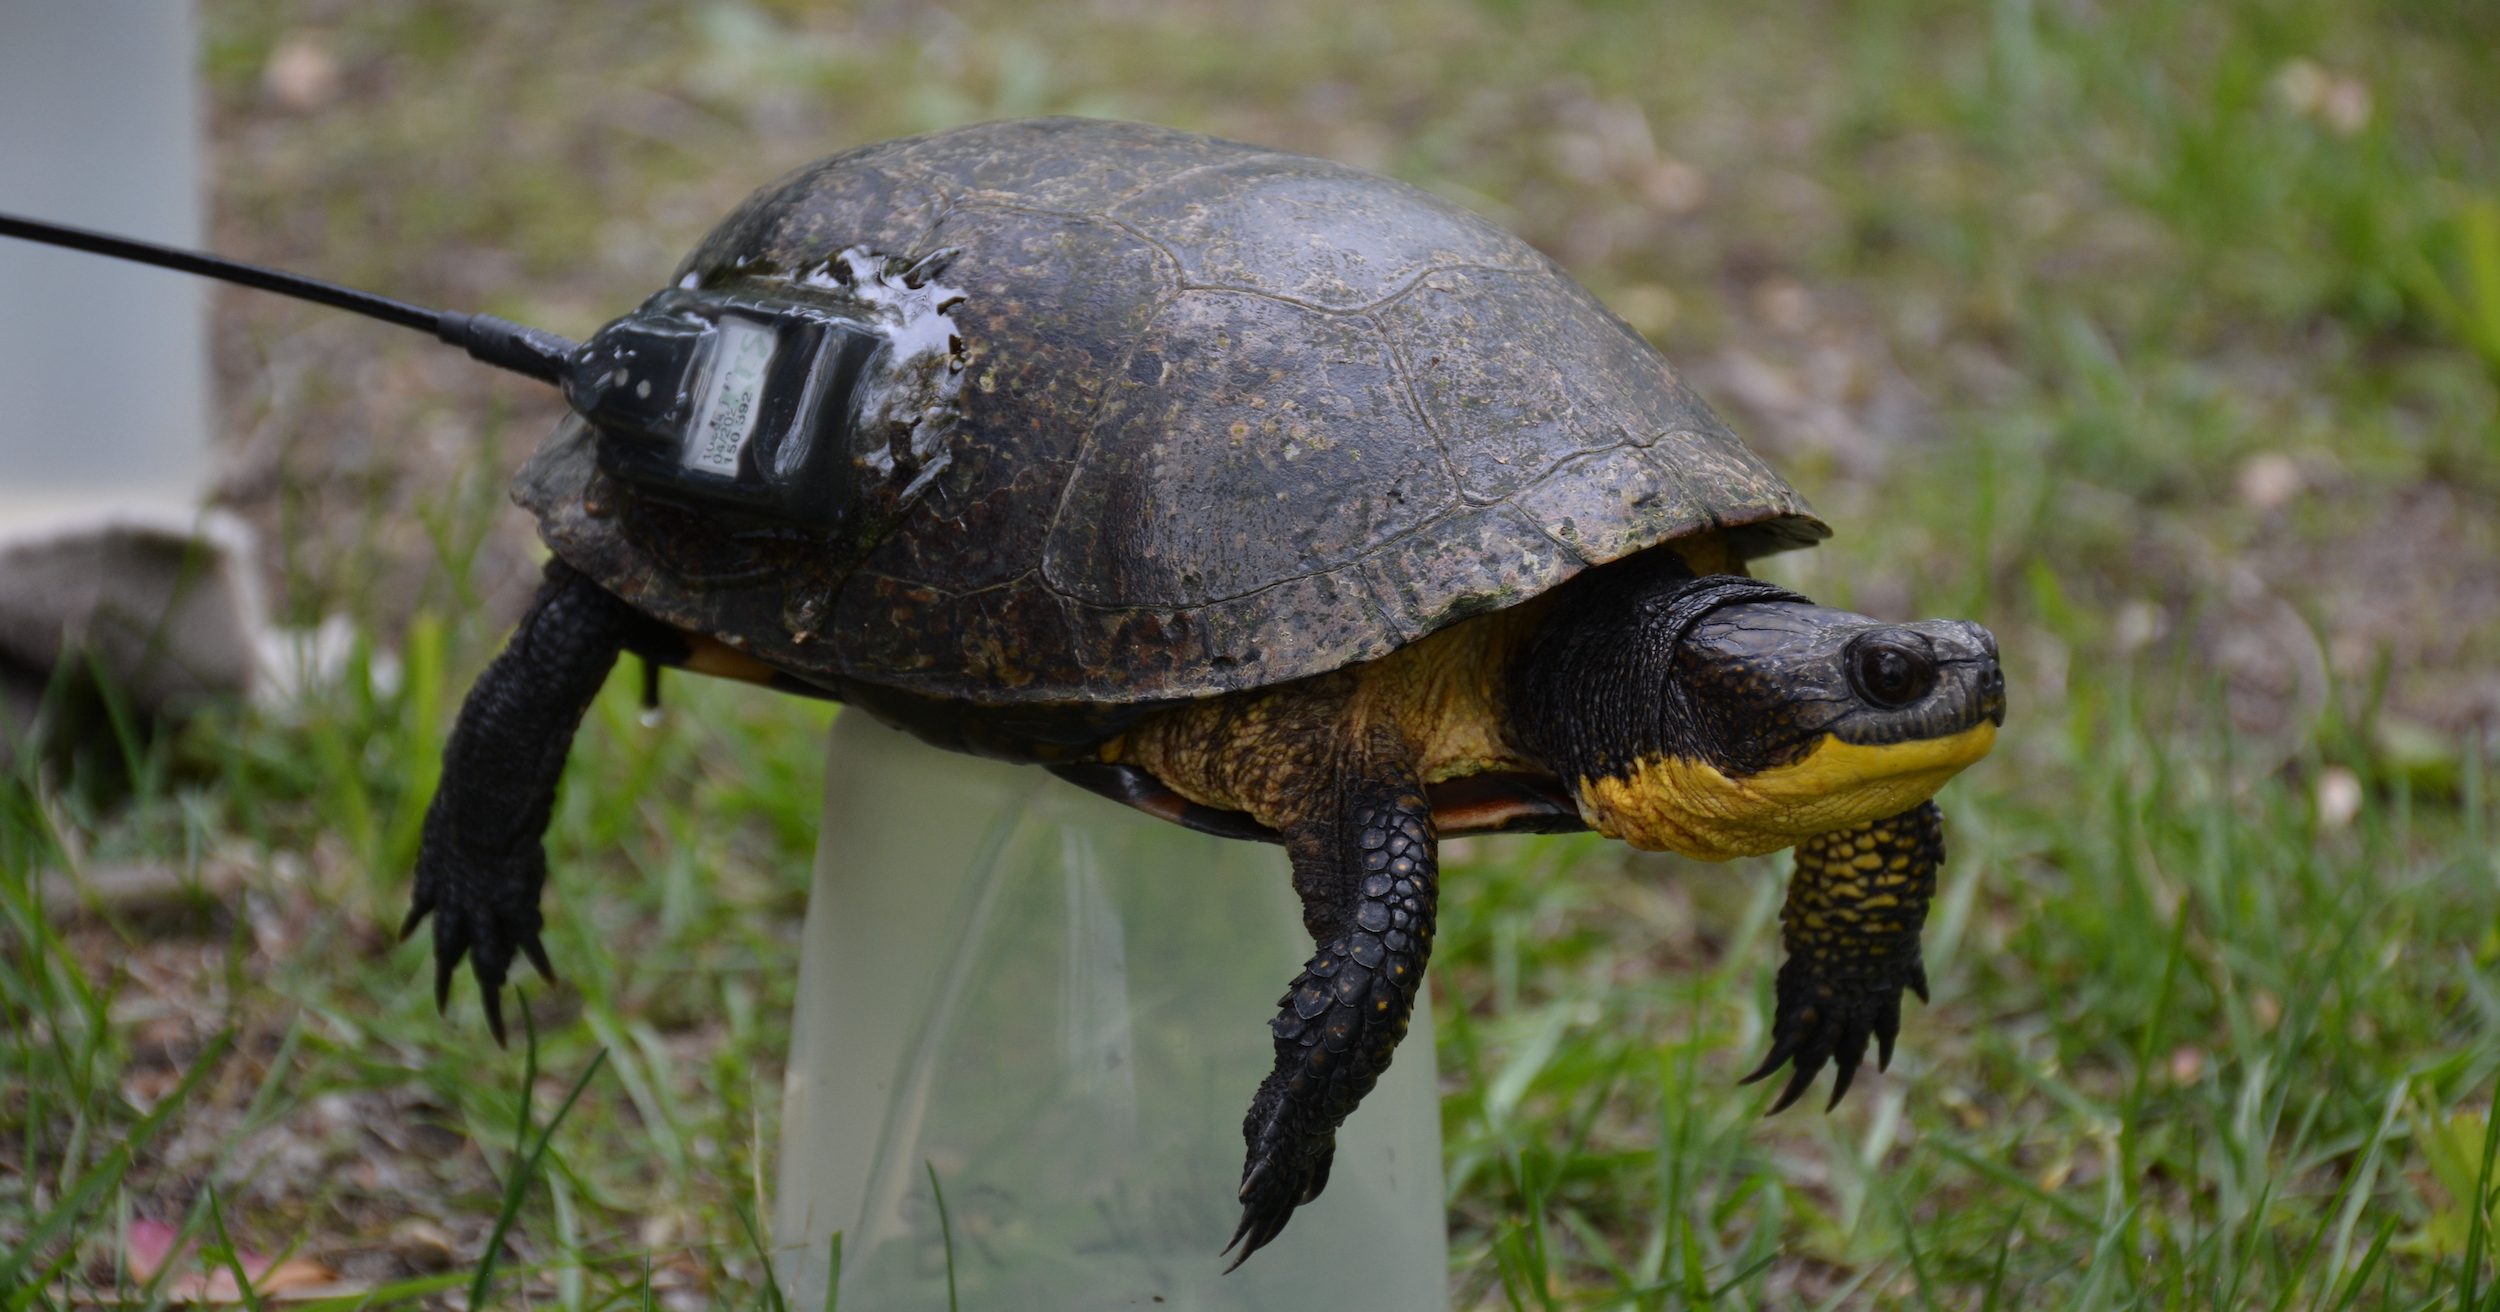 A female Blanding’s turtle being radio tagged.